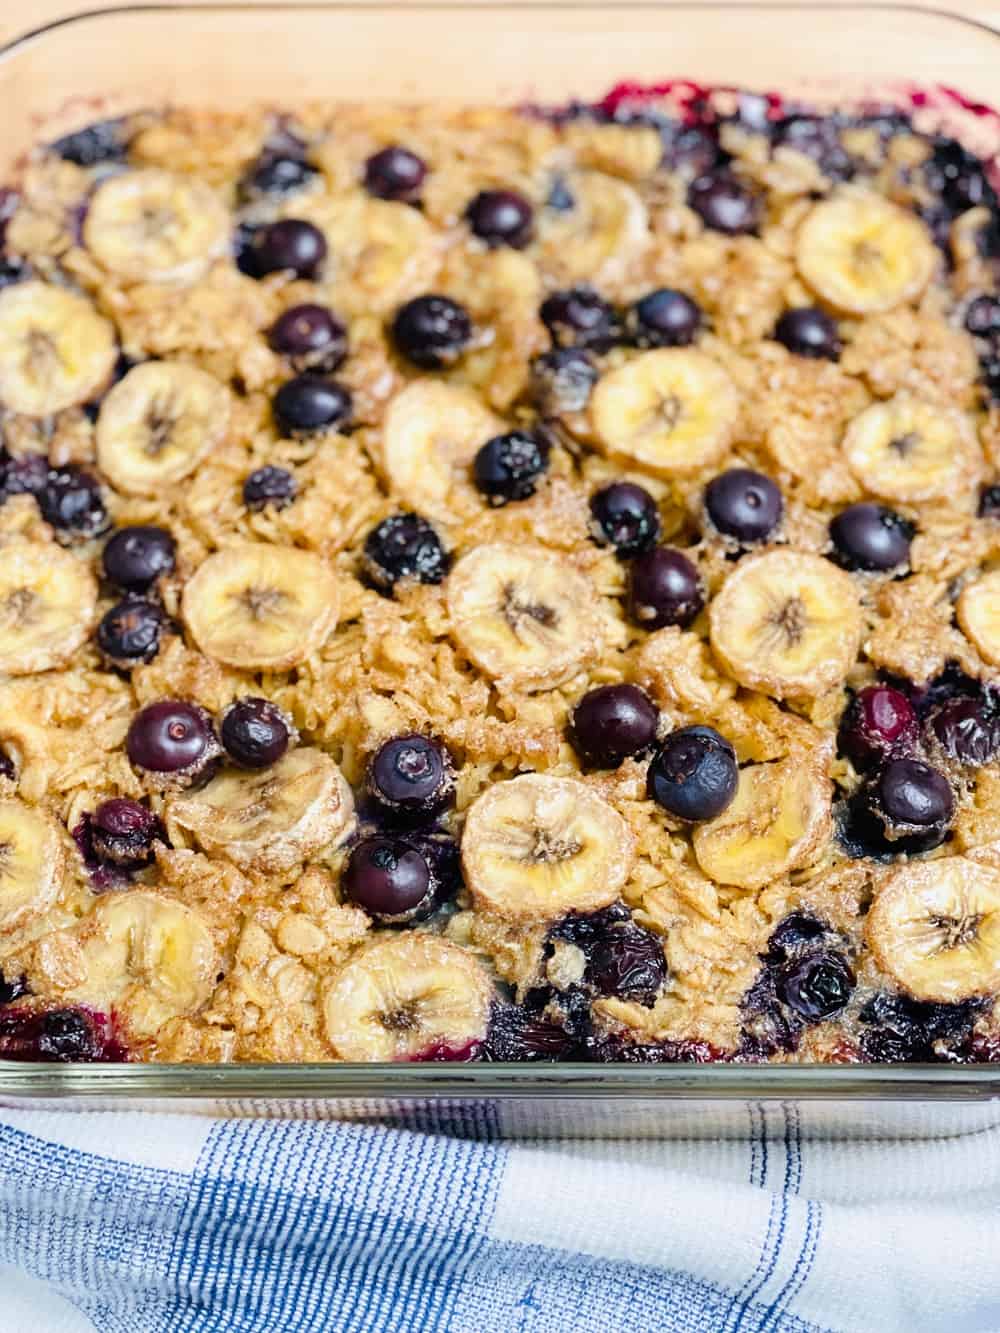 TikTok Baked Oats Recipe made with bananas and blueberries